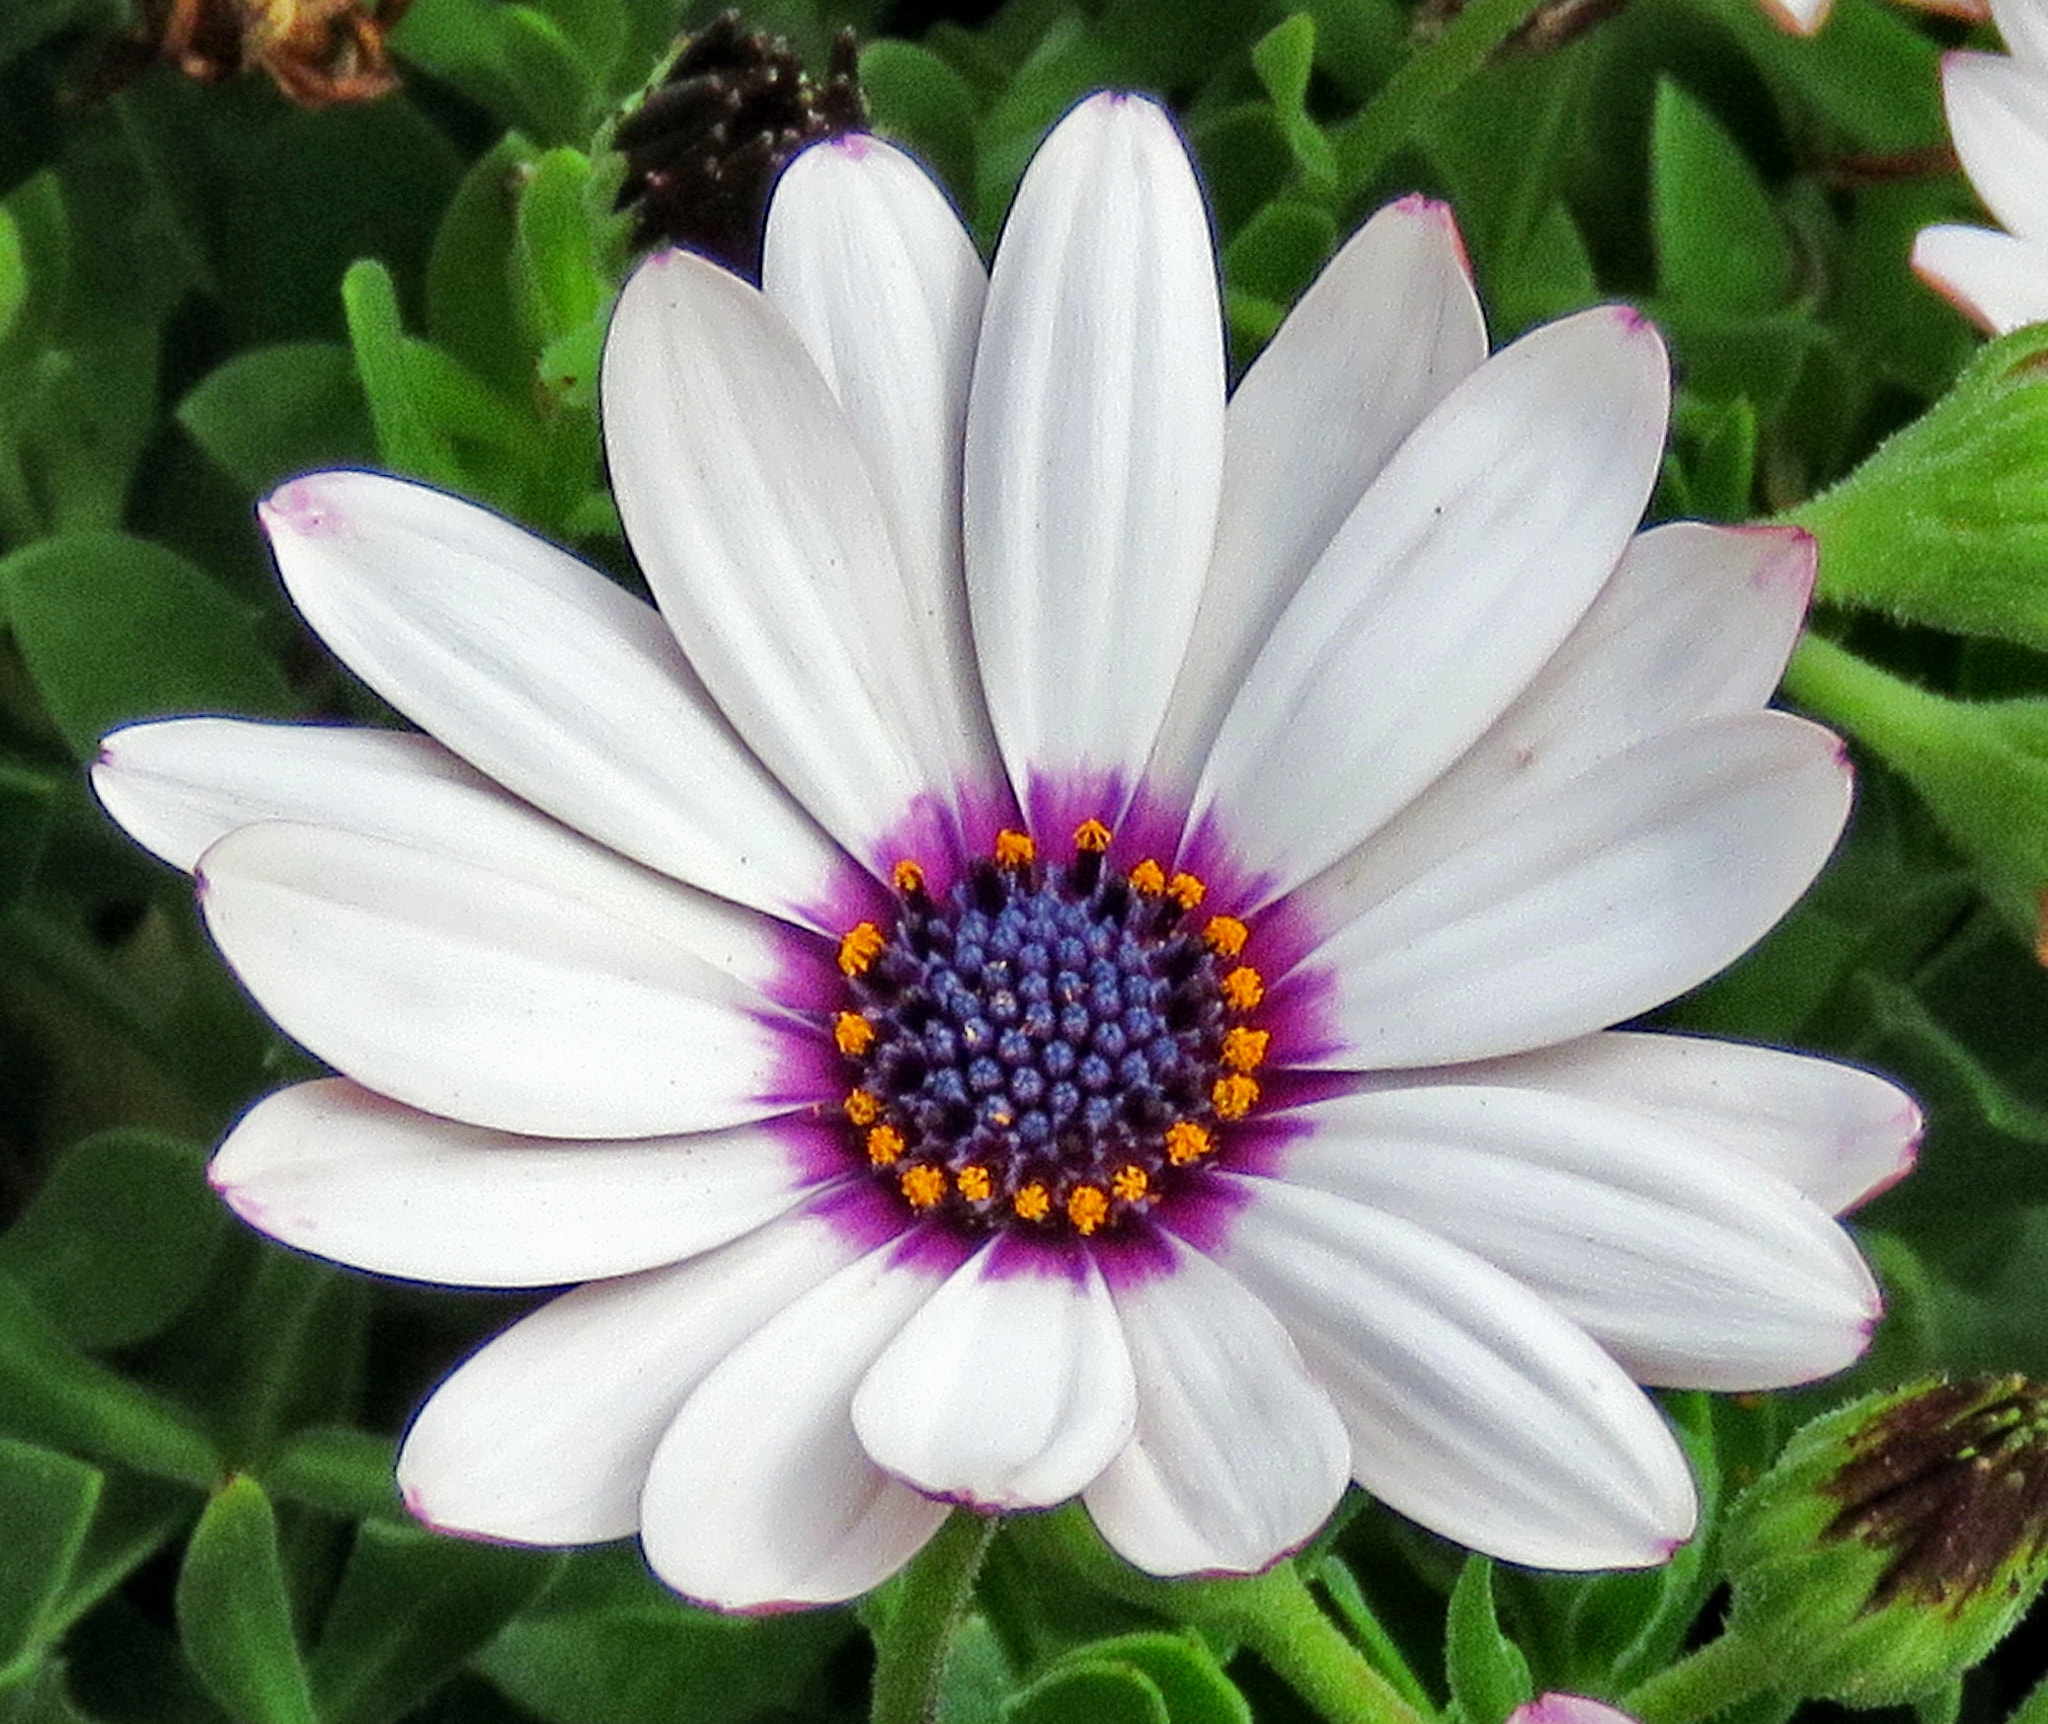 Canon PowerShot SX60 HS sample photo. A white and purple and gold daisy flower photography